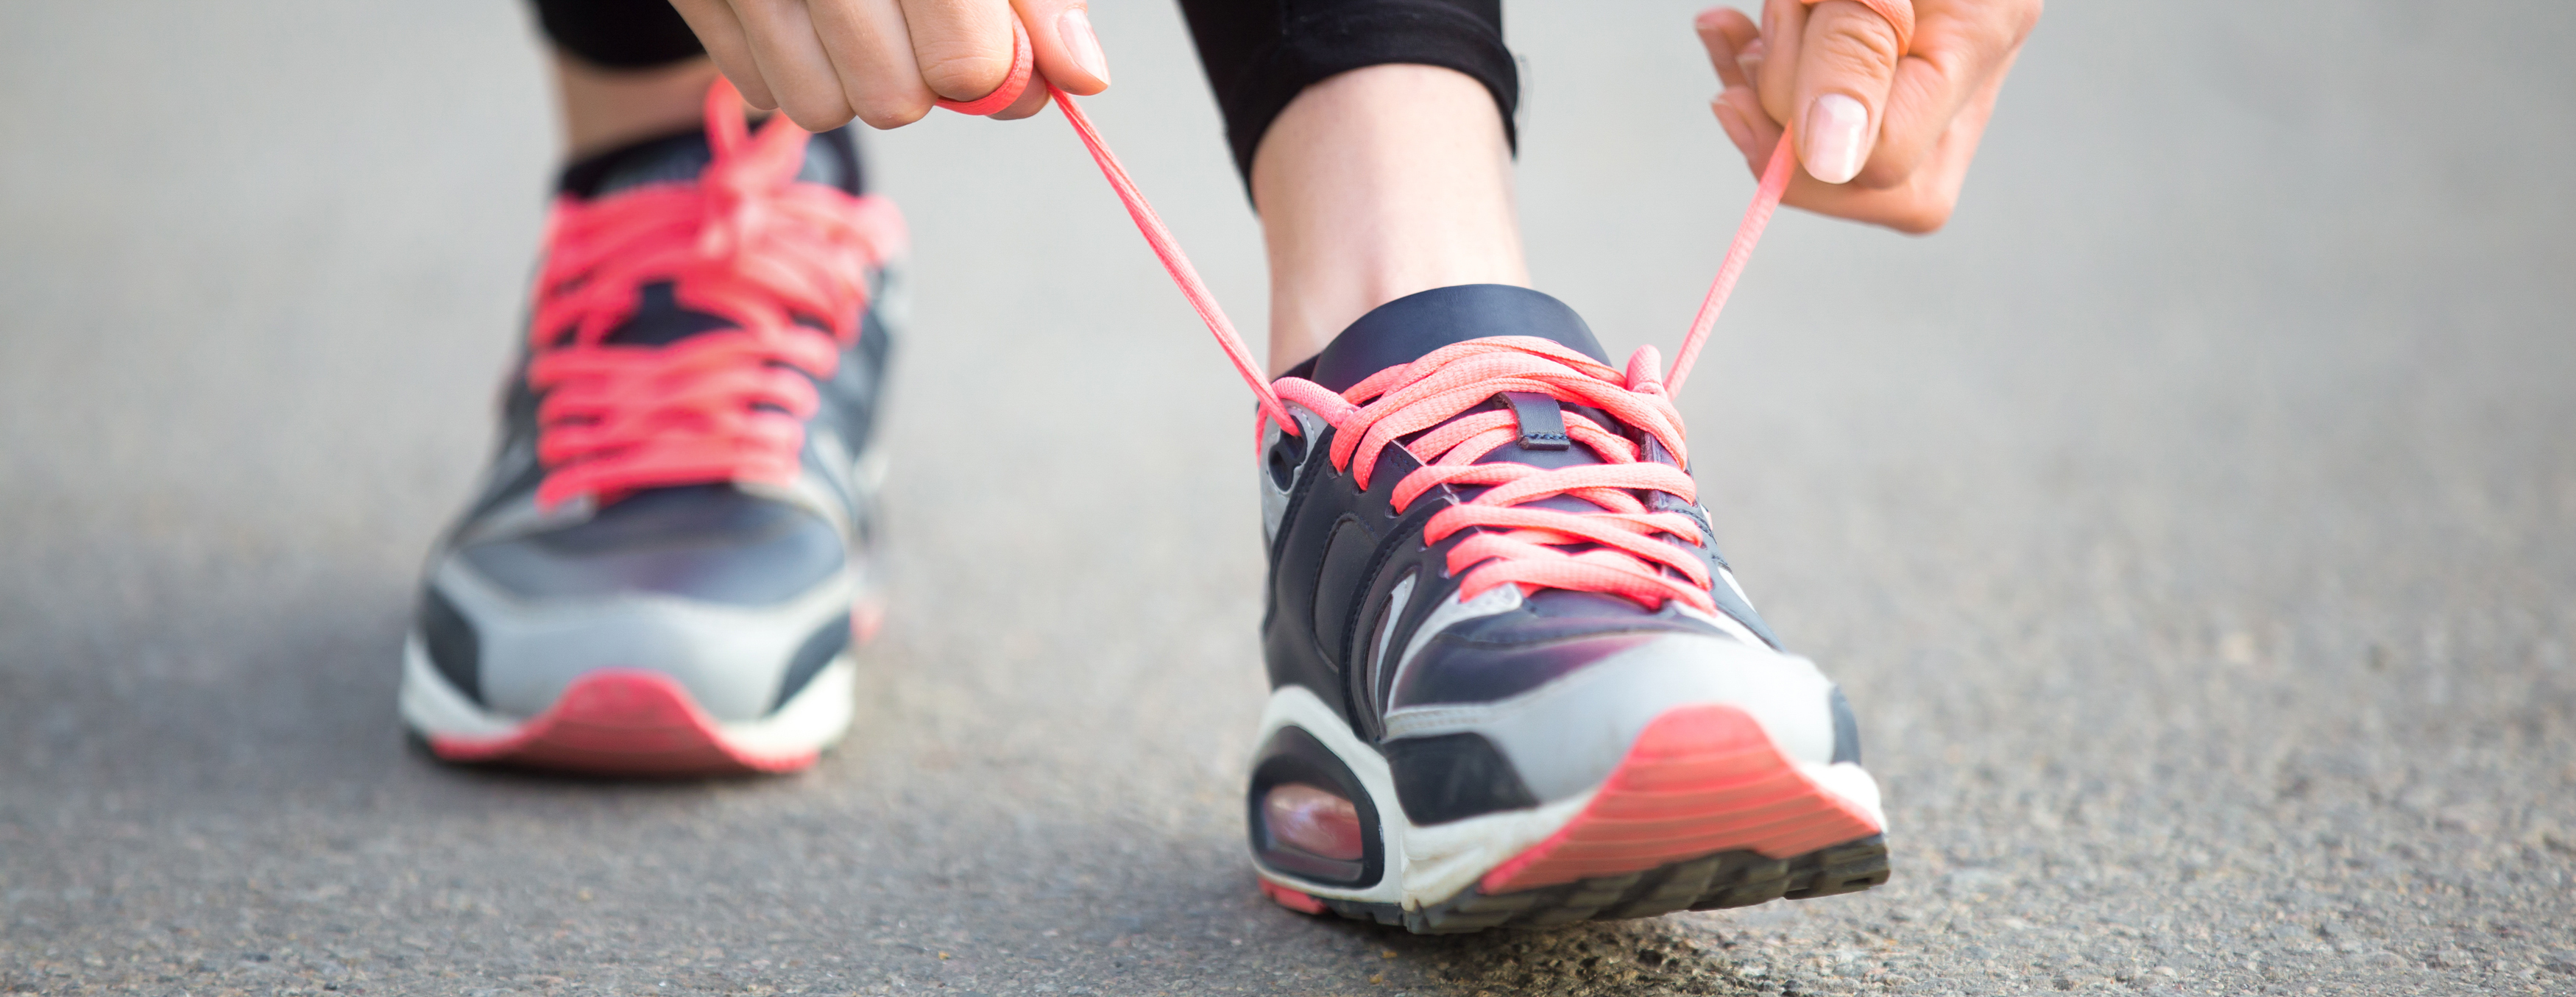 ways to tie shoelaces for running